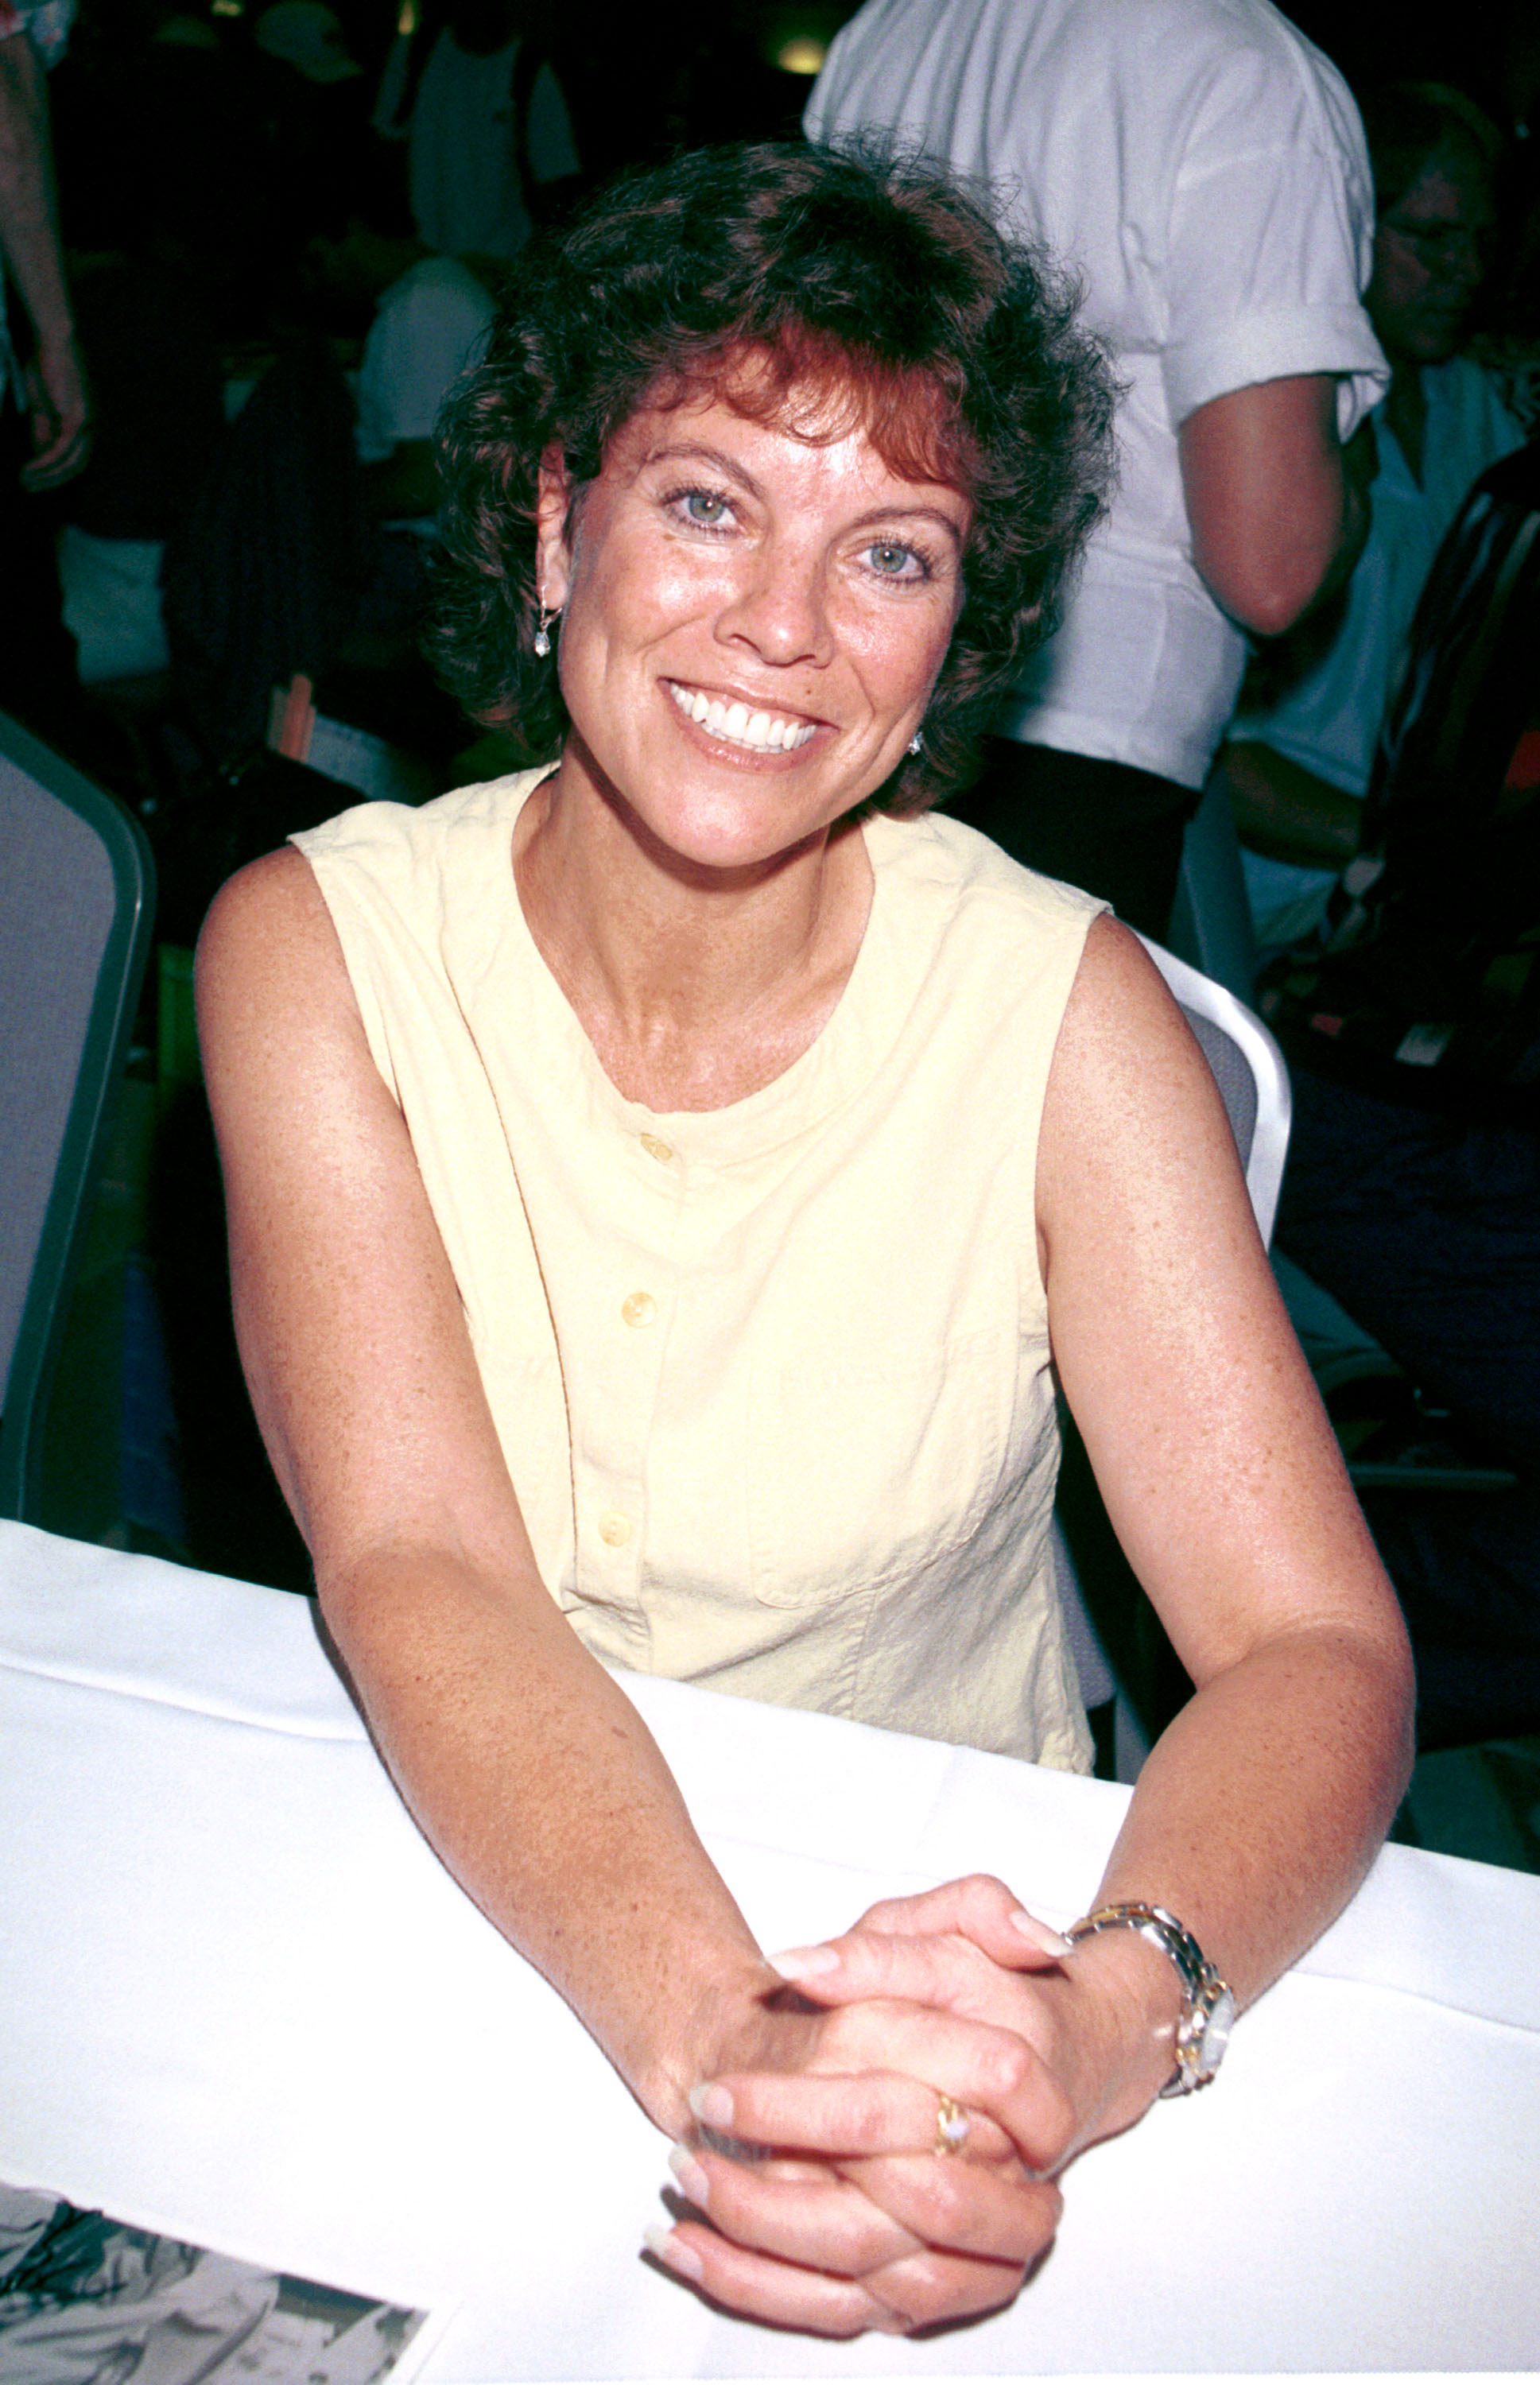 Actress Erin Moran in North Hollywood, California on June 23, 2001 | Source: Getty Images